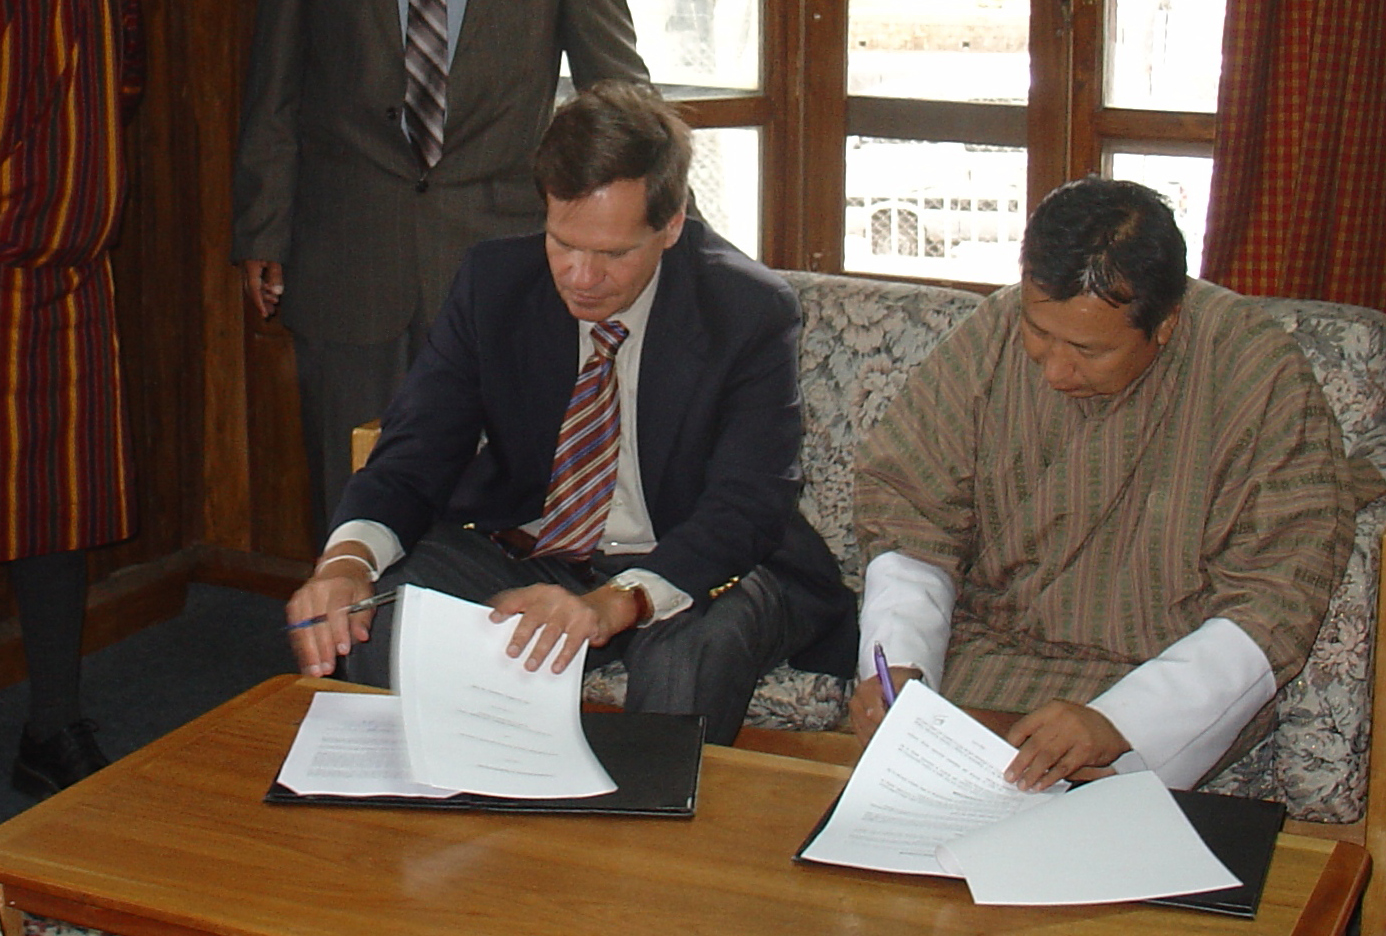 USAID/India Mission Director George Deikun and Energy Specialist, DOE/Royal Govt. of Bhutan Karma Chhothel (on behalf of the Director General) signing the MOU on July 10, 2008 in Thimpu (Bhutan). Photo Credit: USAID/India.